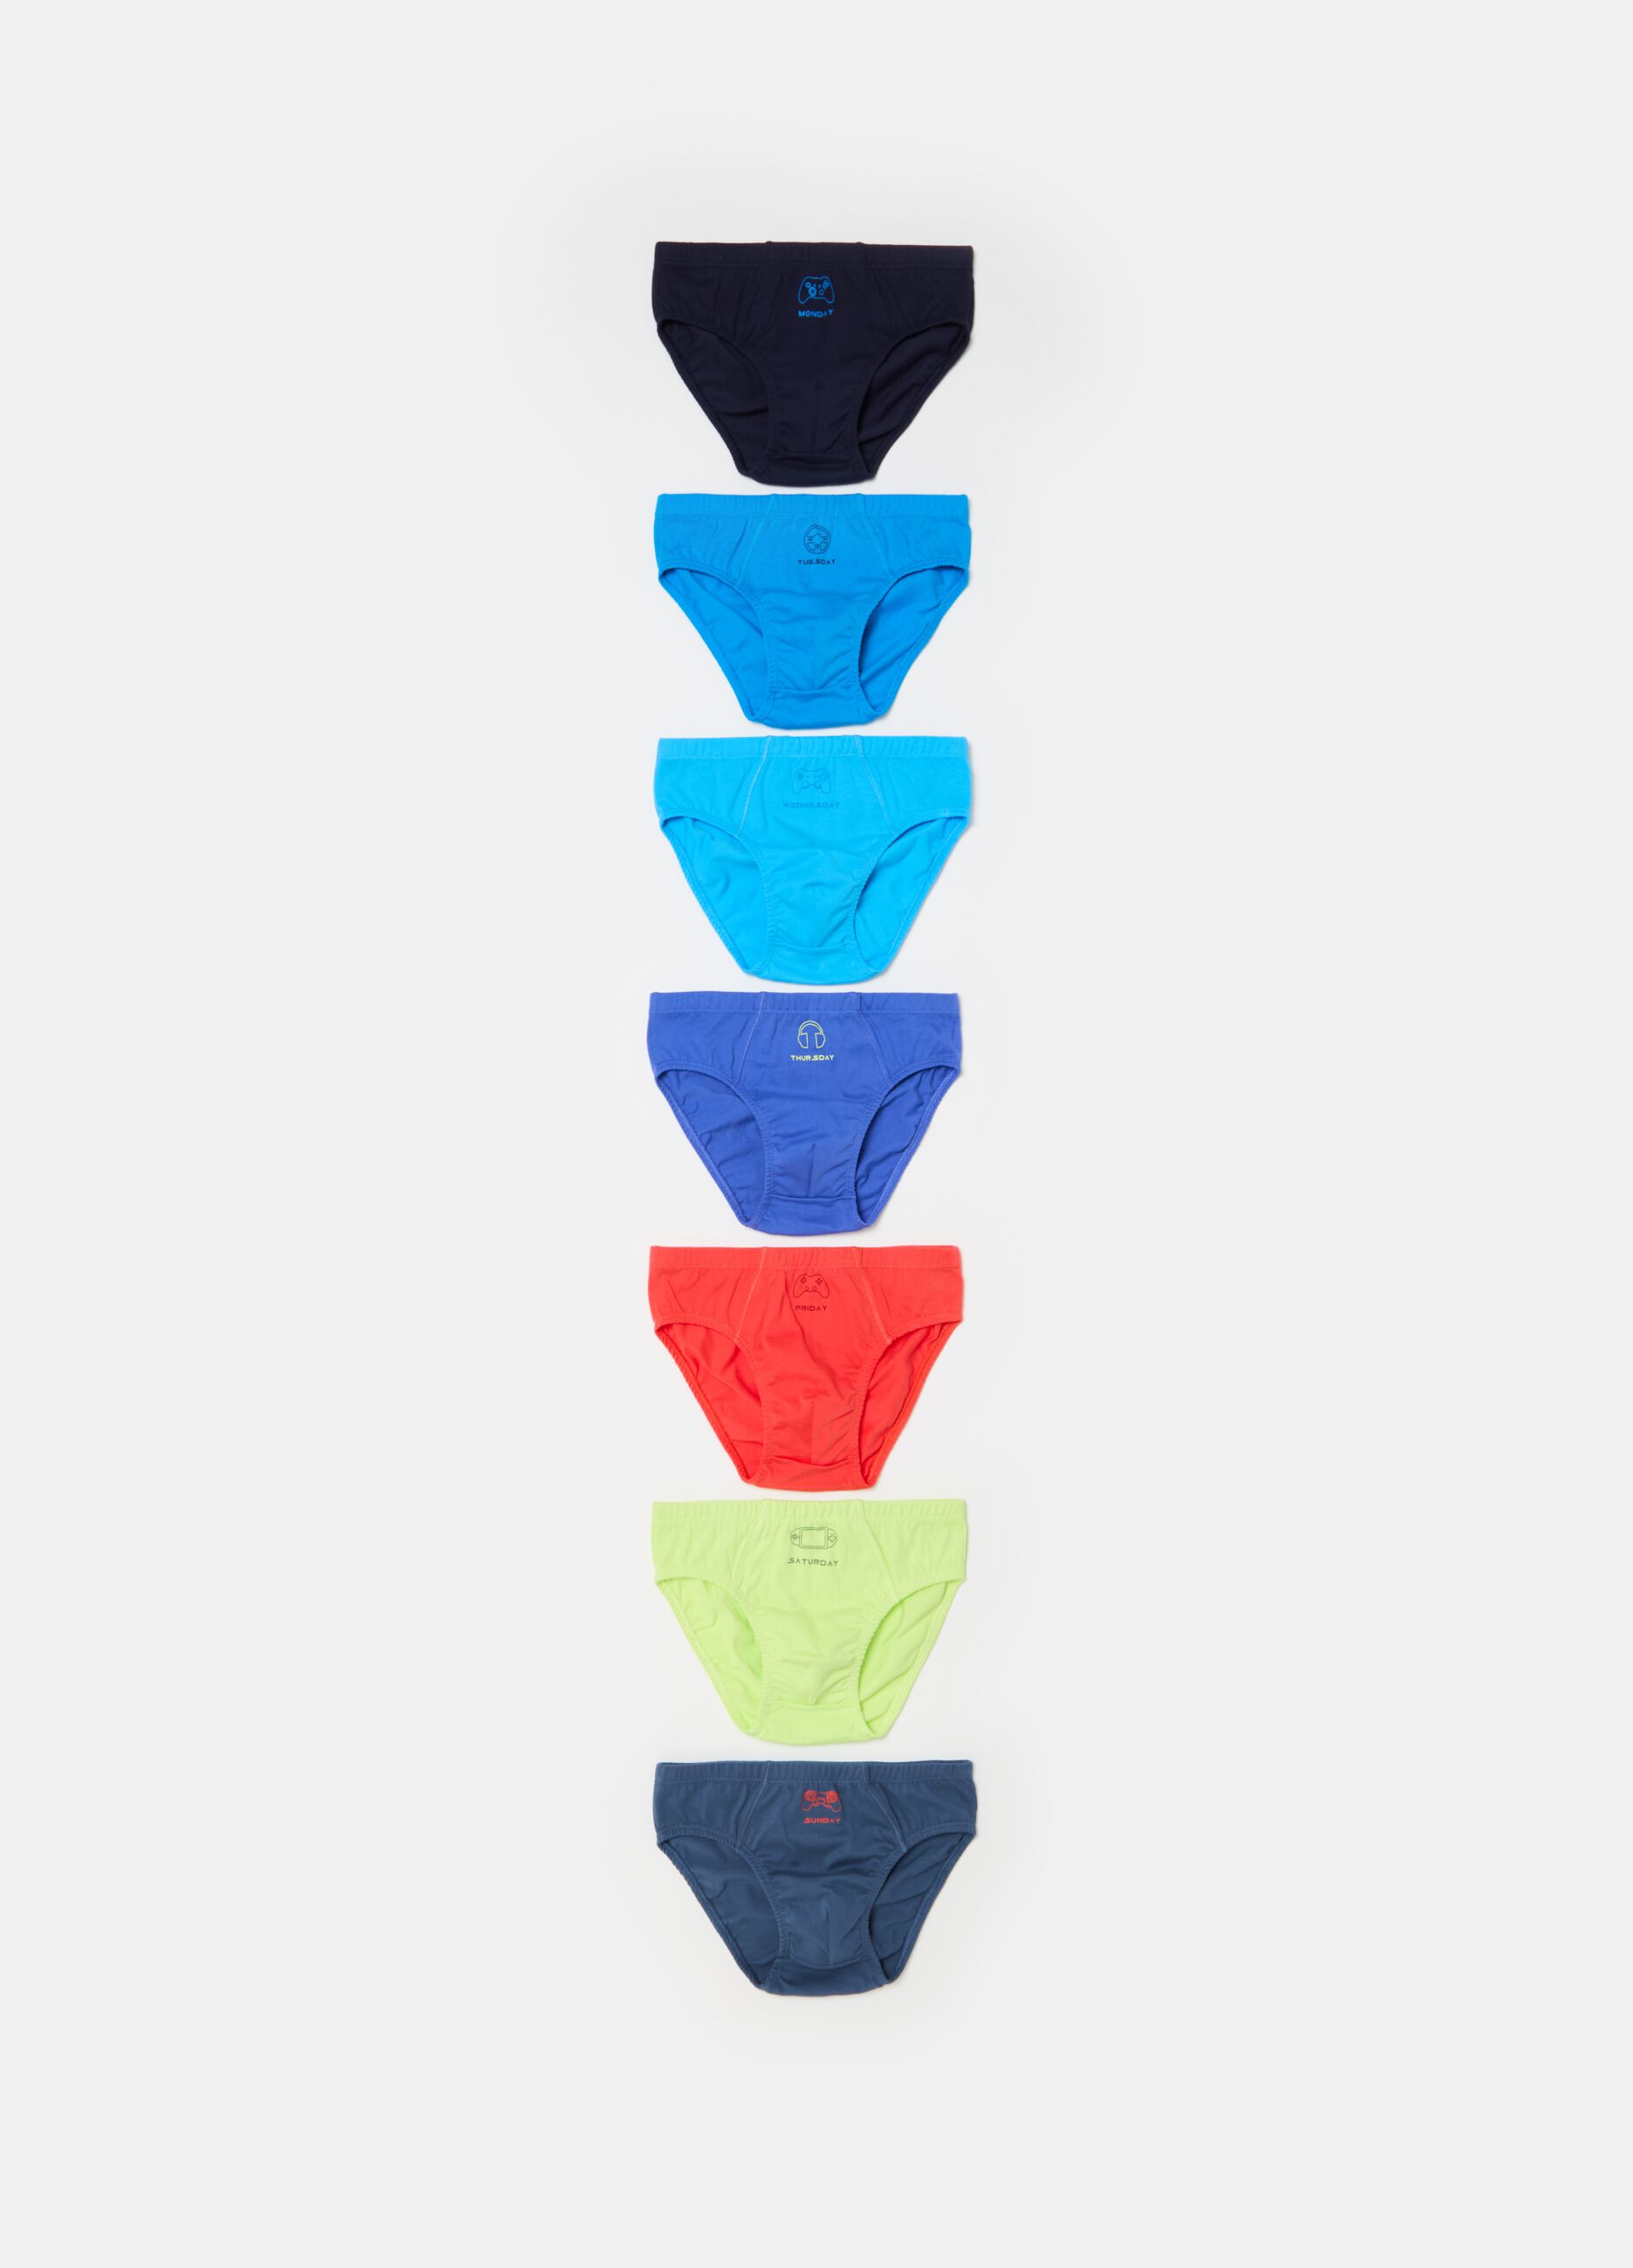 Seven-pack briefs with days of the week